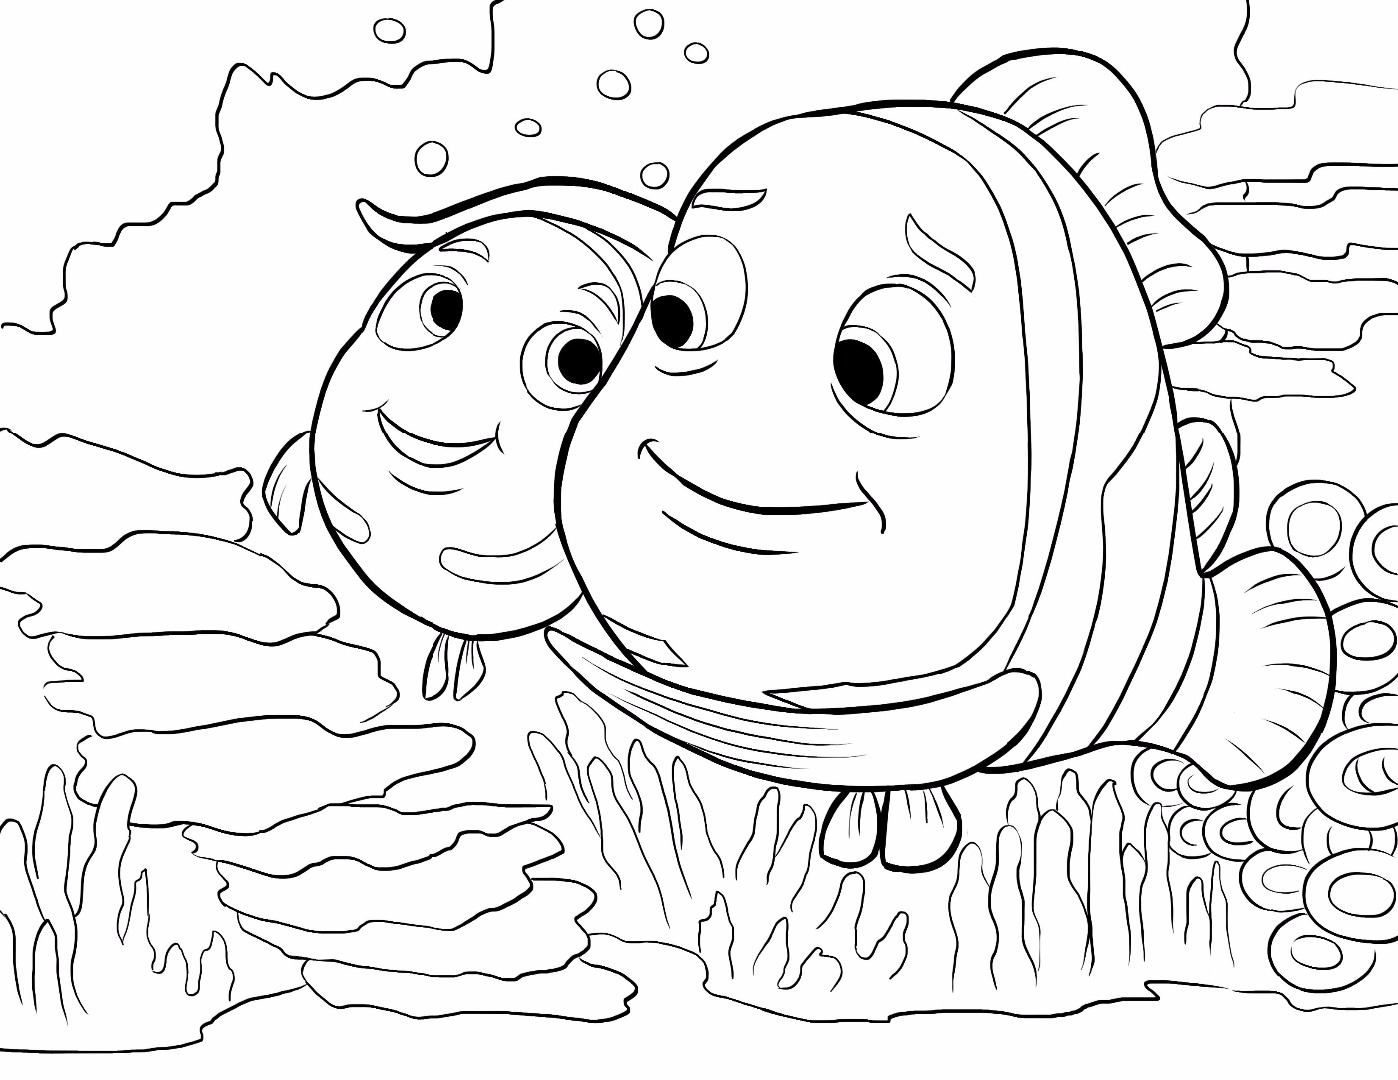 Crush and squirt coloring pages